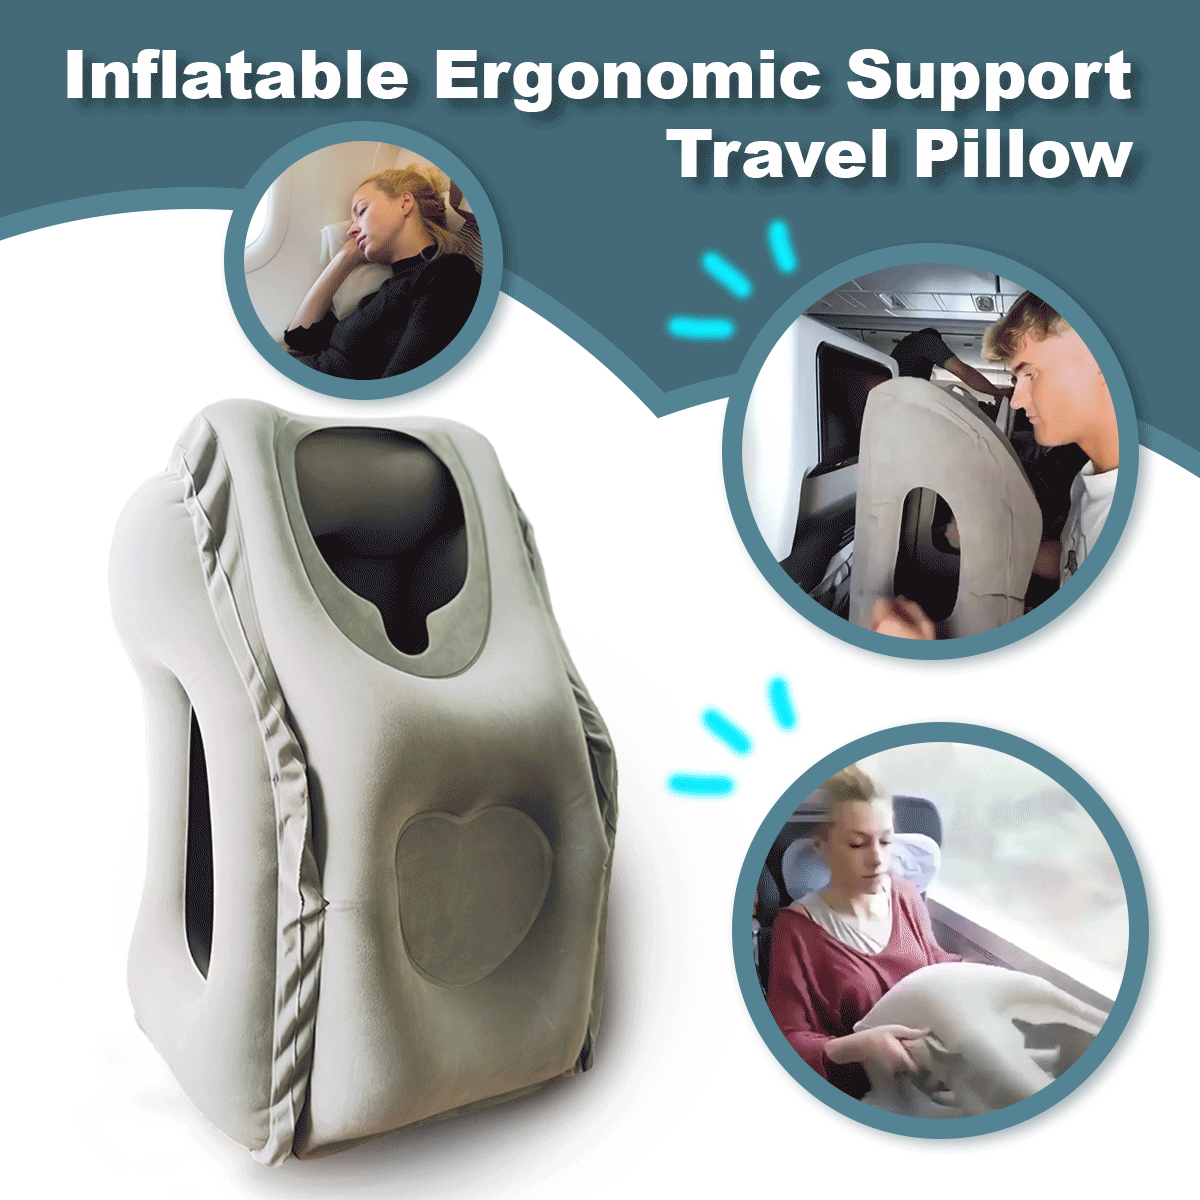 This is a discount for you - Inflatable Ergonomic Support Travel Pillow